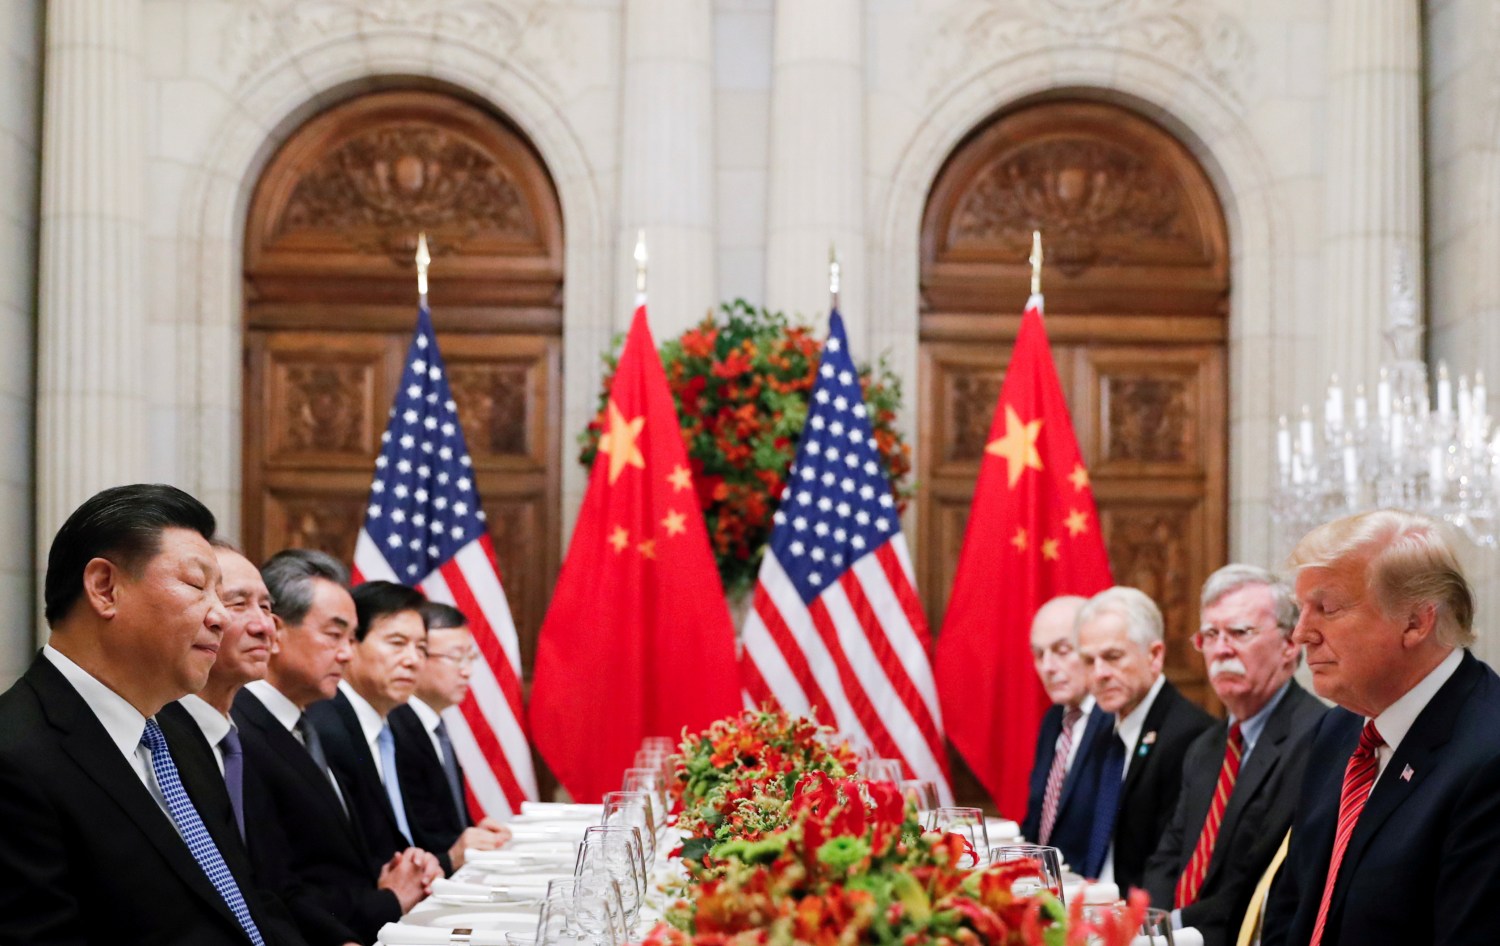 FILE PHOTO: U.S. President Donald Trump, U.S. Secretary of State Mike Pompeo, U.S. President Donald Trump's national security adviser John Bolton and Chinese President Xi Jinping attend a working dinner after the G20 leaders summit in Buenos Aires, Argentina December 1, 2018. REUTERS/Kevin Lamarque - RC142DD2AE40/File Photo